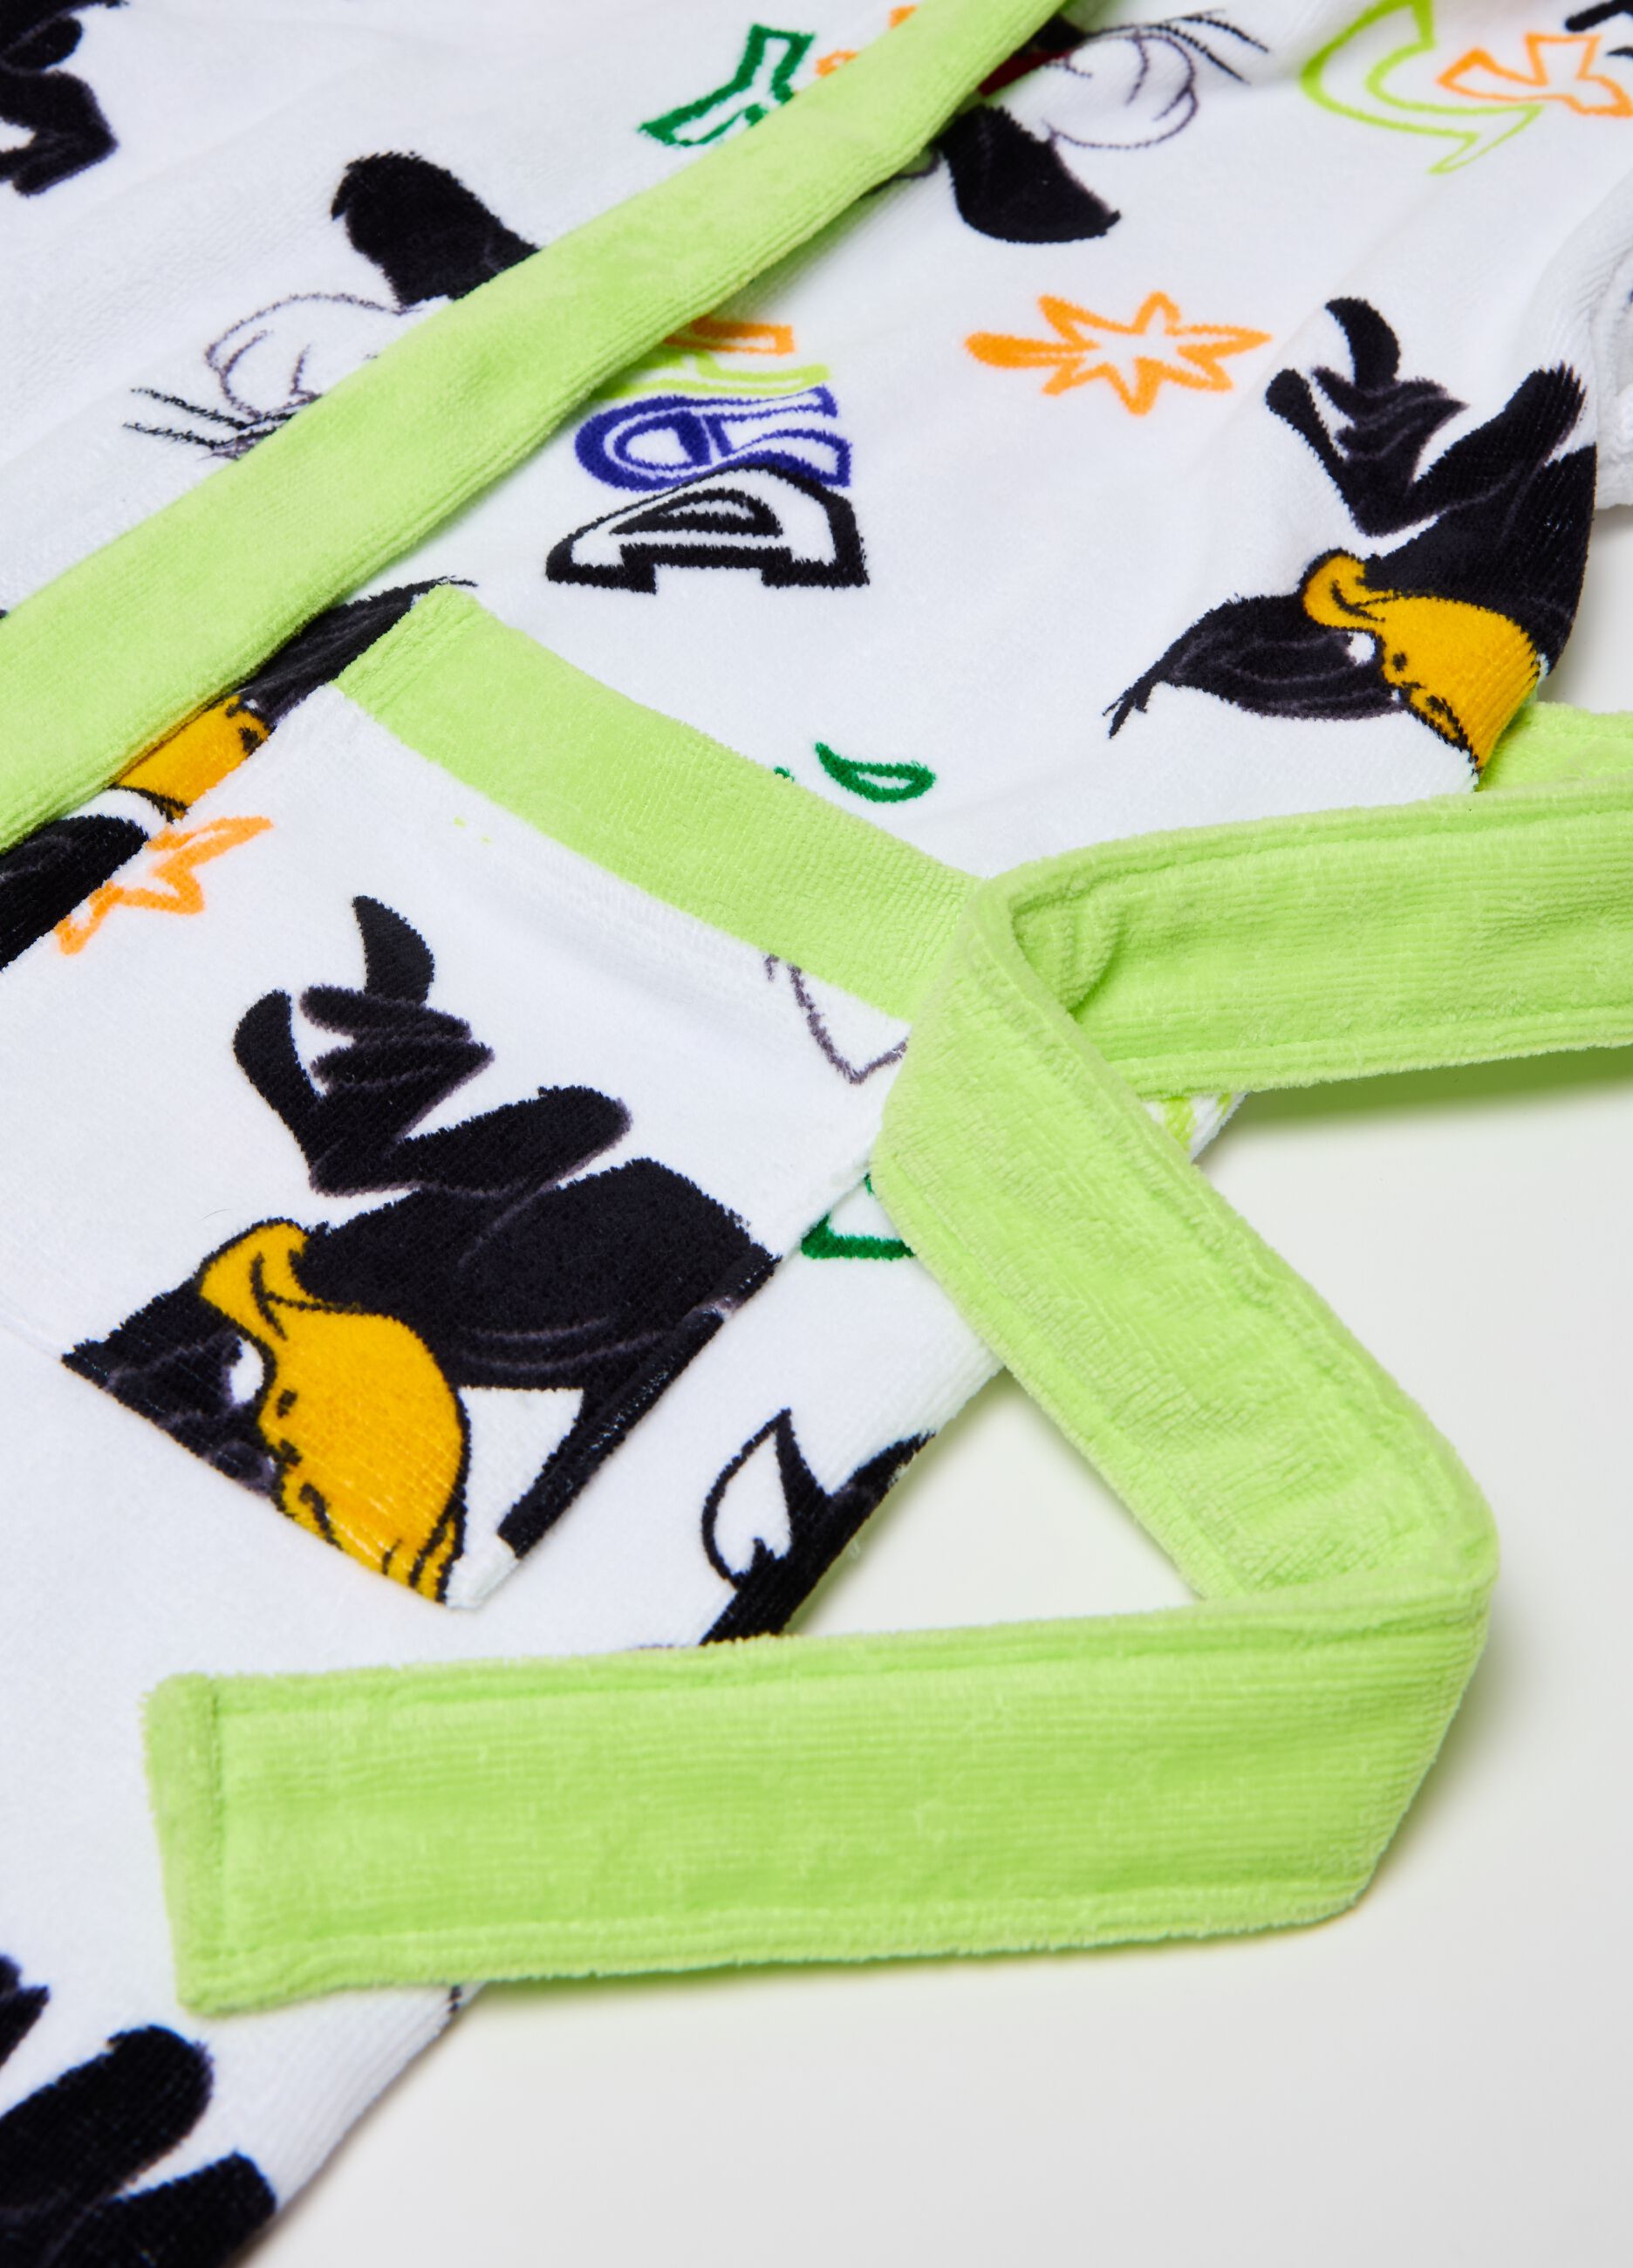 Bathrobe with Sylvester Cat and Daffy Duck